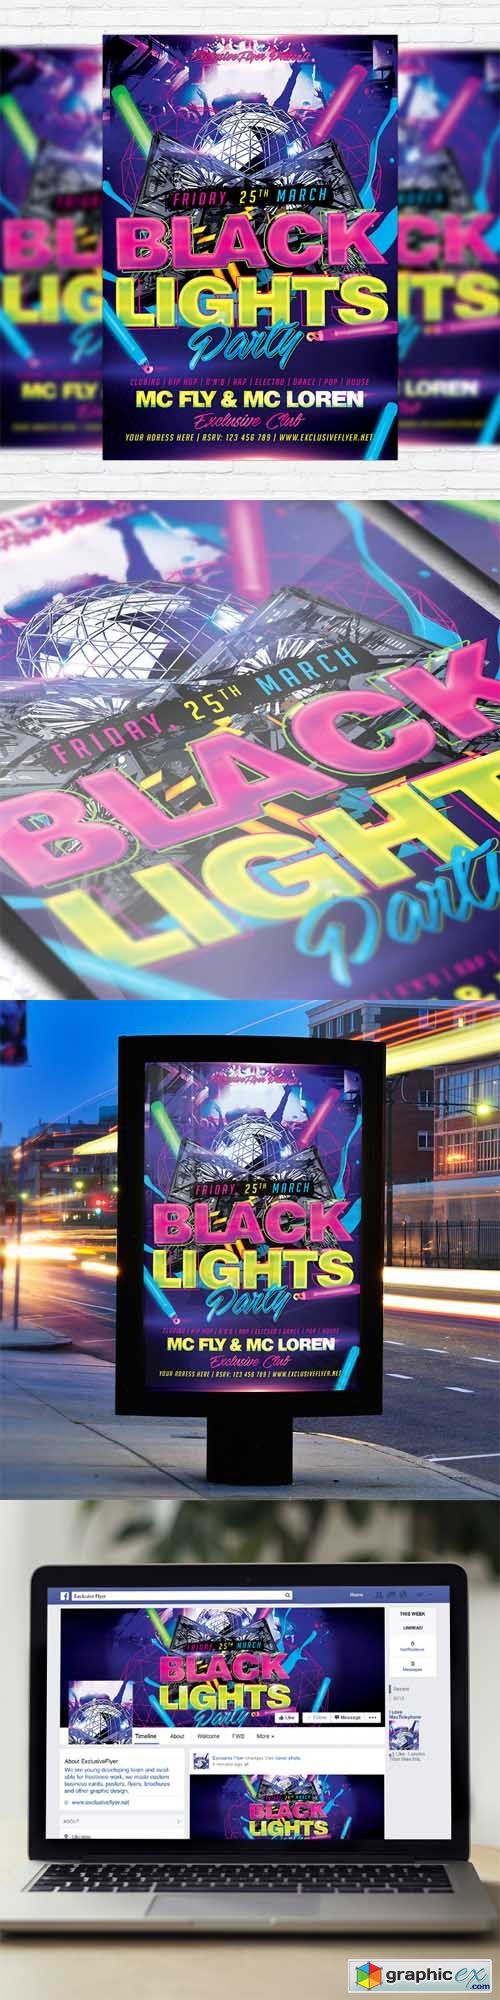 Black Light Party - Flyer Template + Facebook Cover